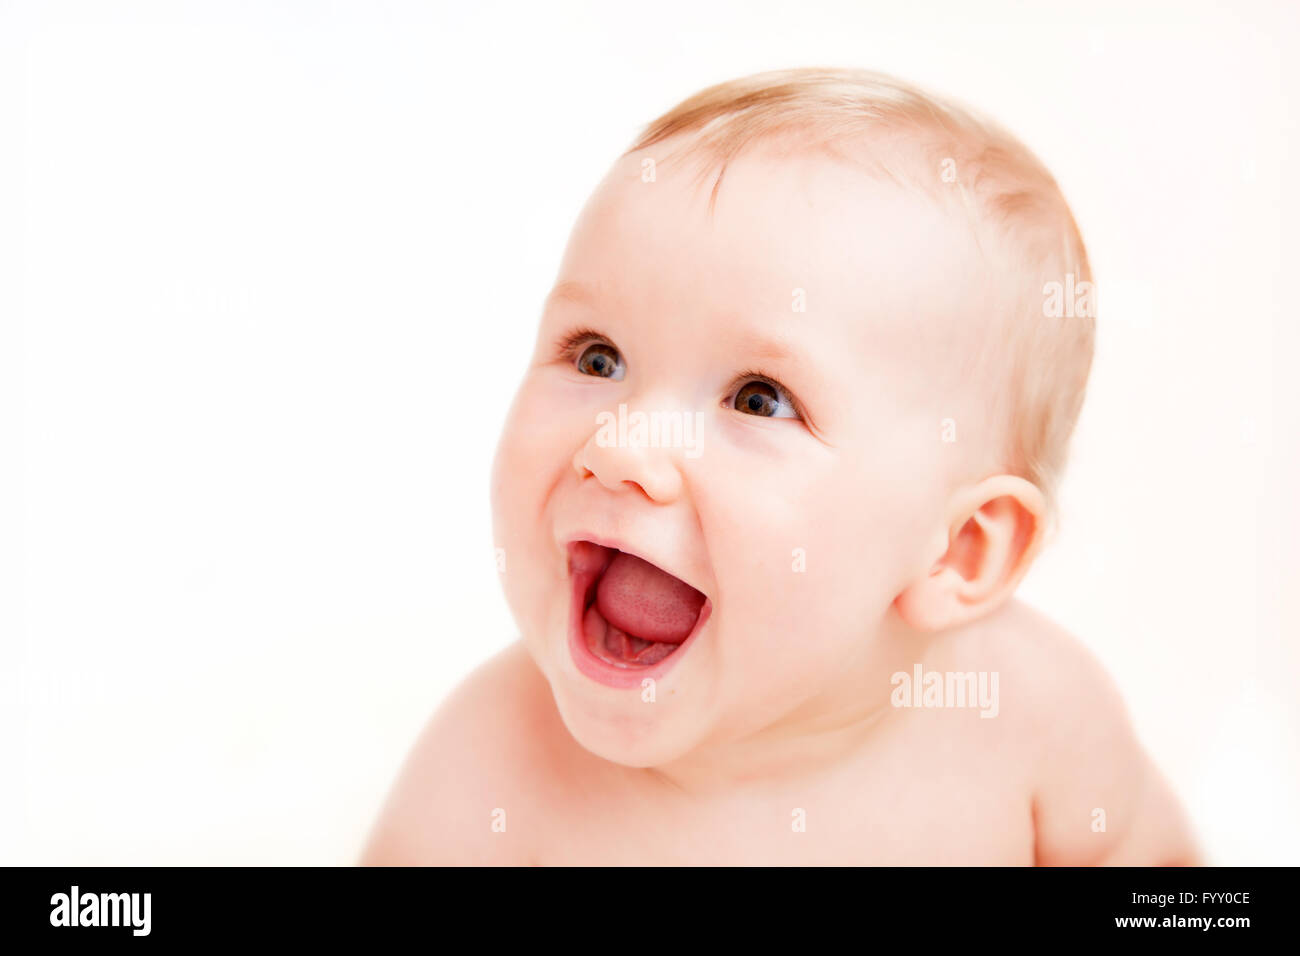 Cute happy baby laughing on white Banque D'Images